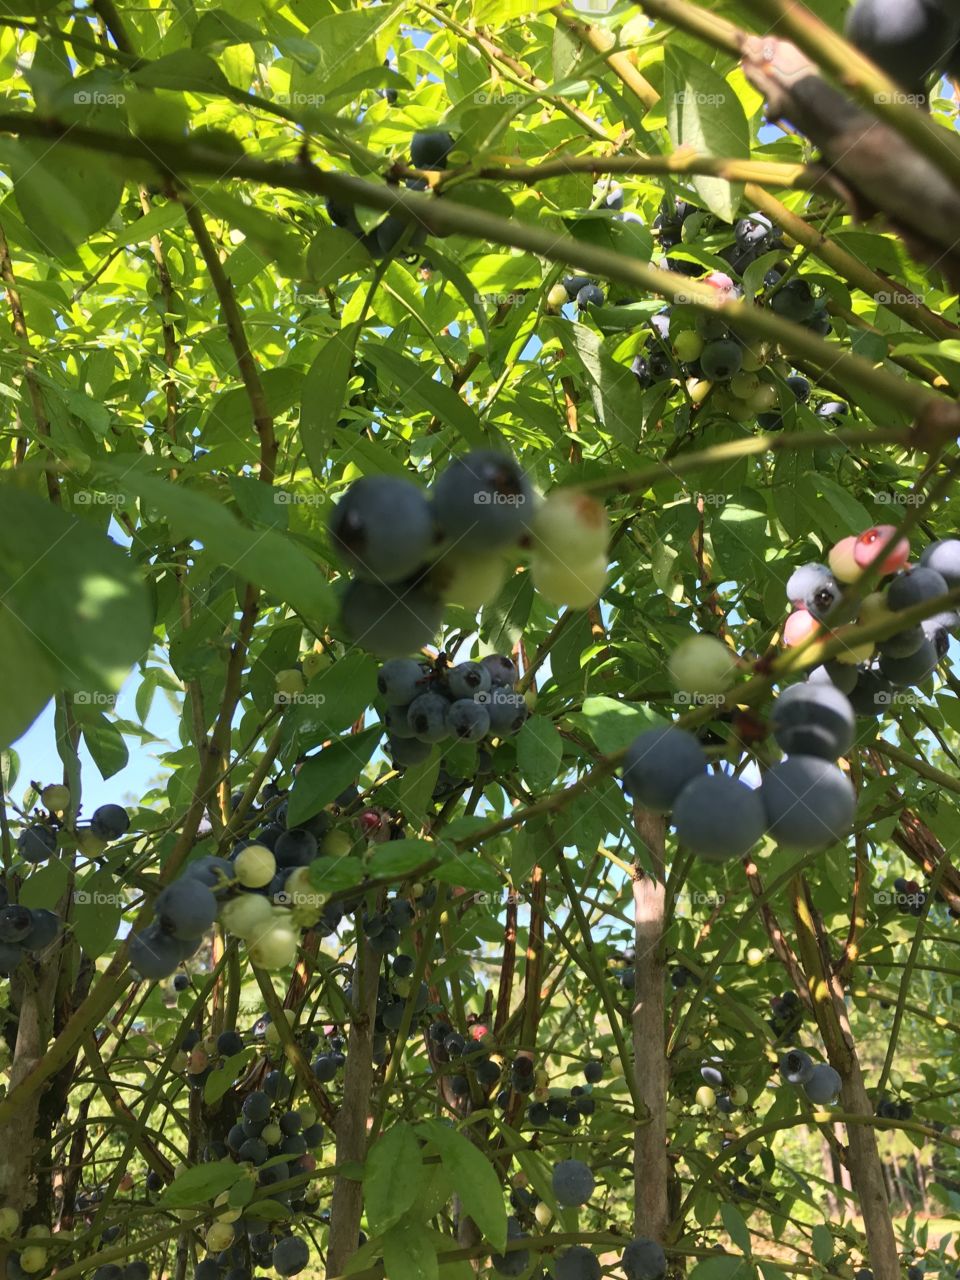 Big and plump blueberries, ready for the picking. 